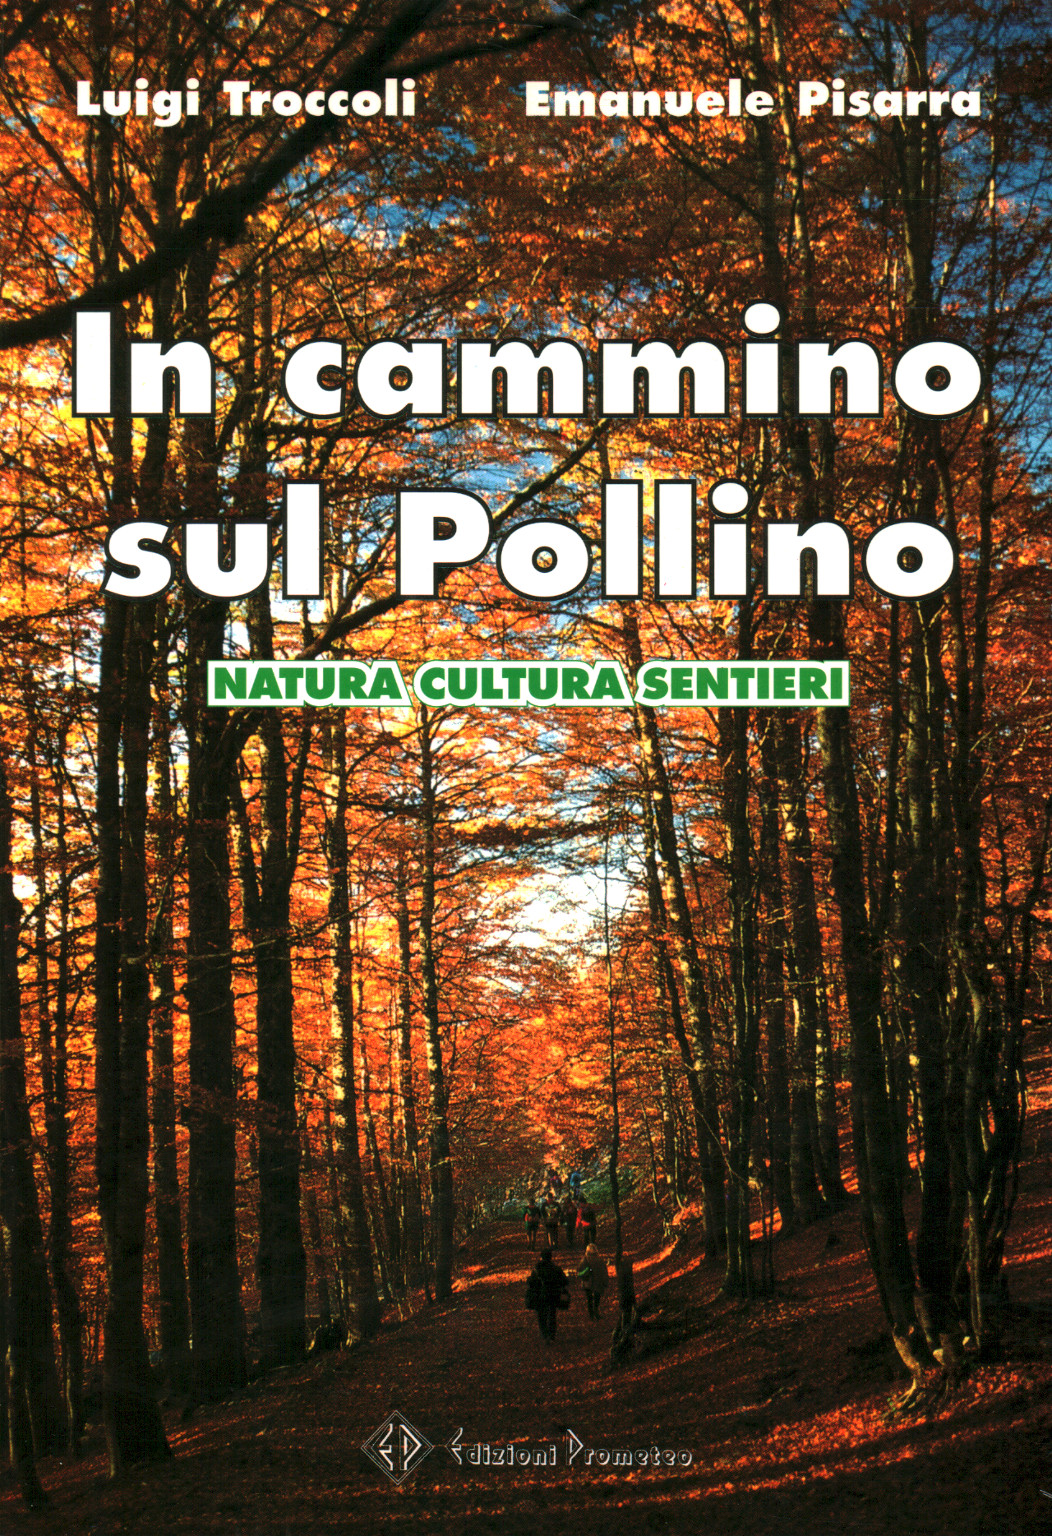 In walk on the Pollino, s.a.